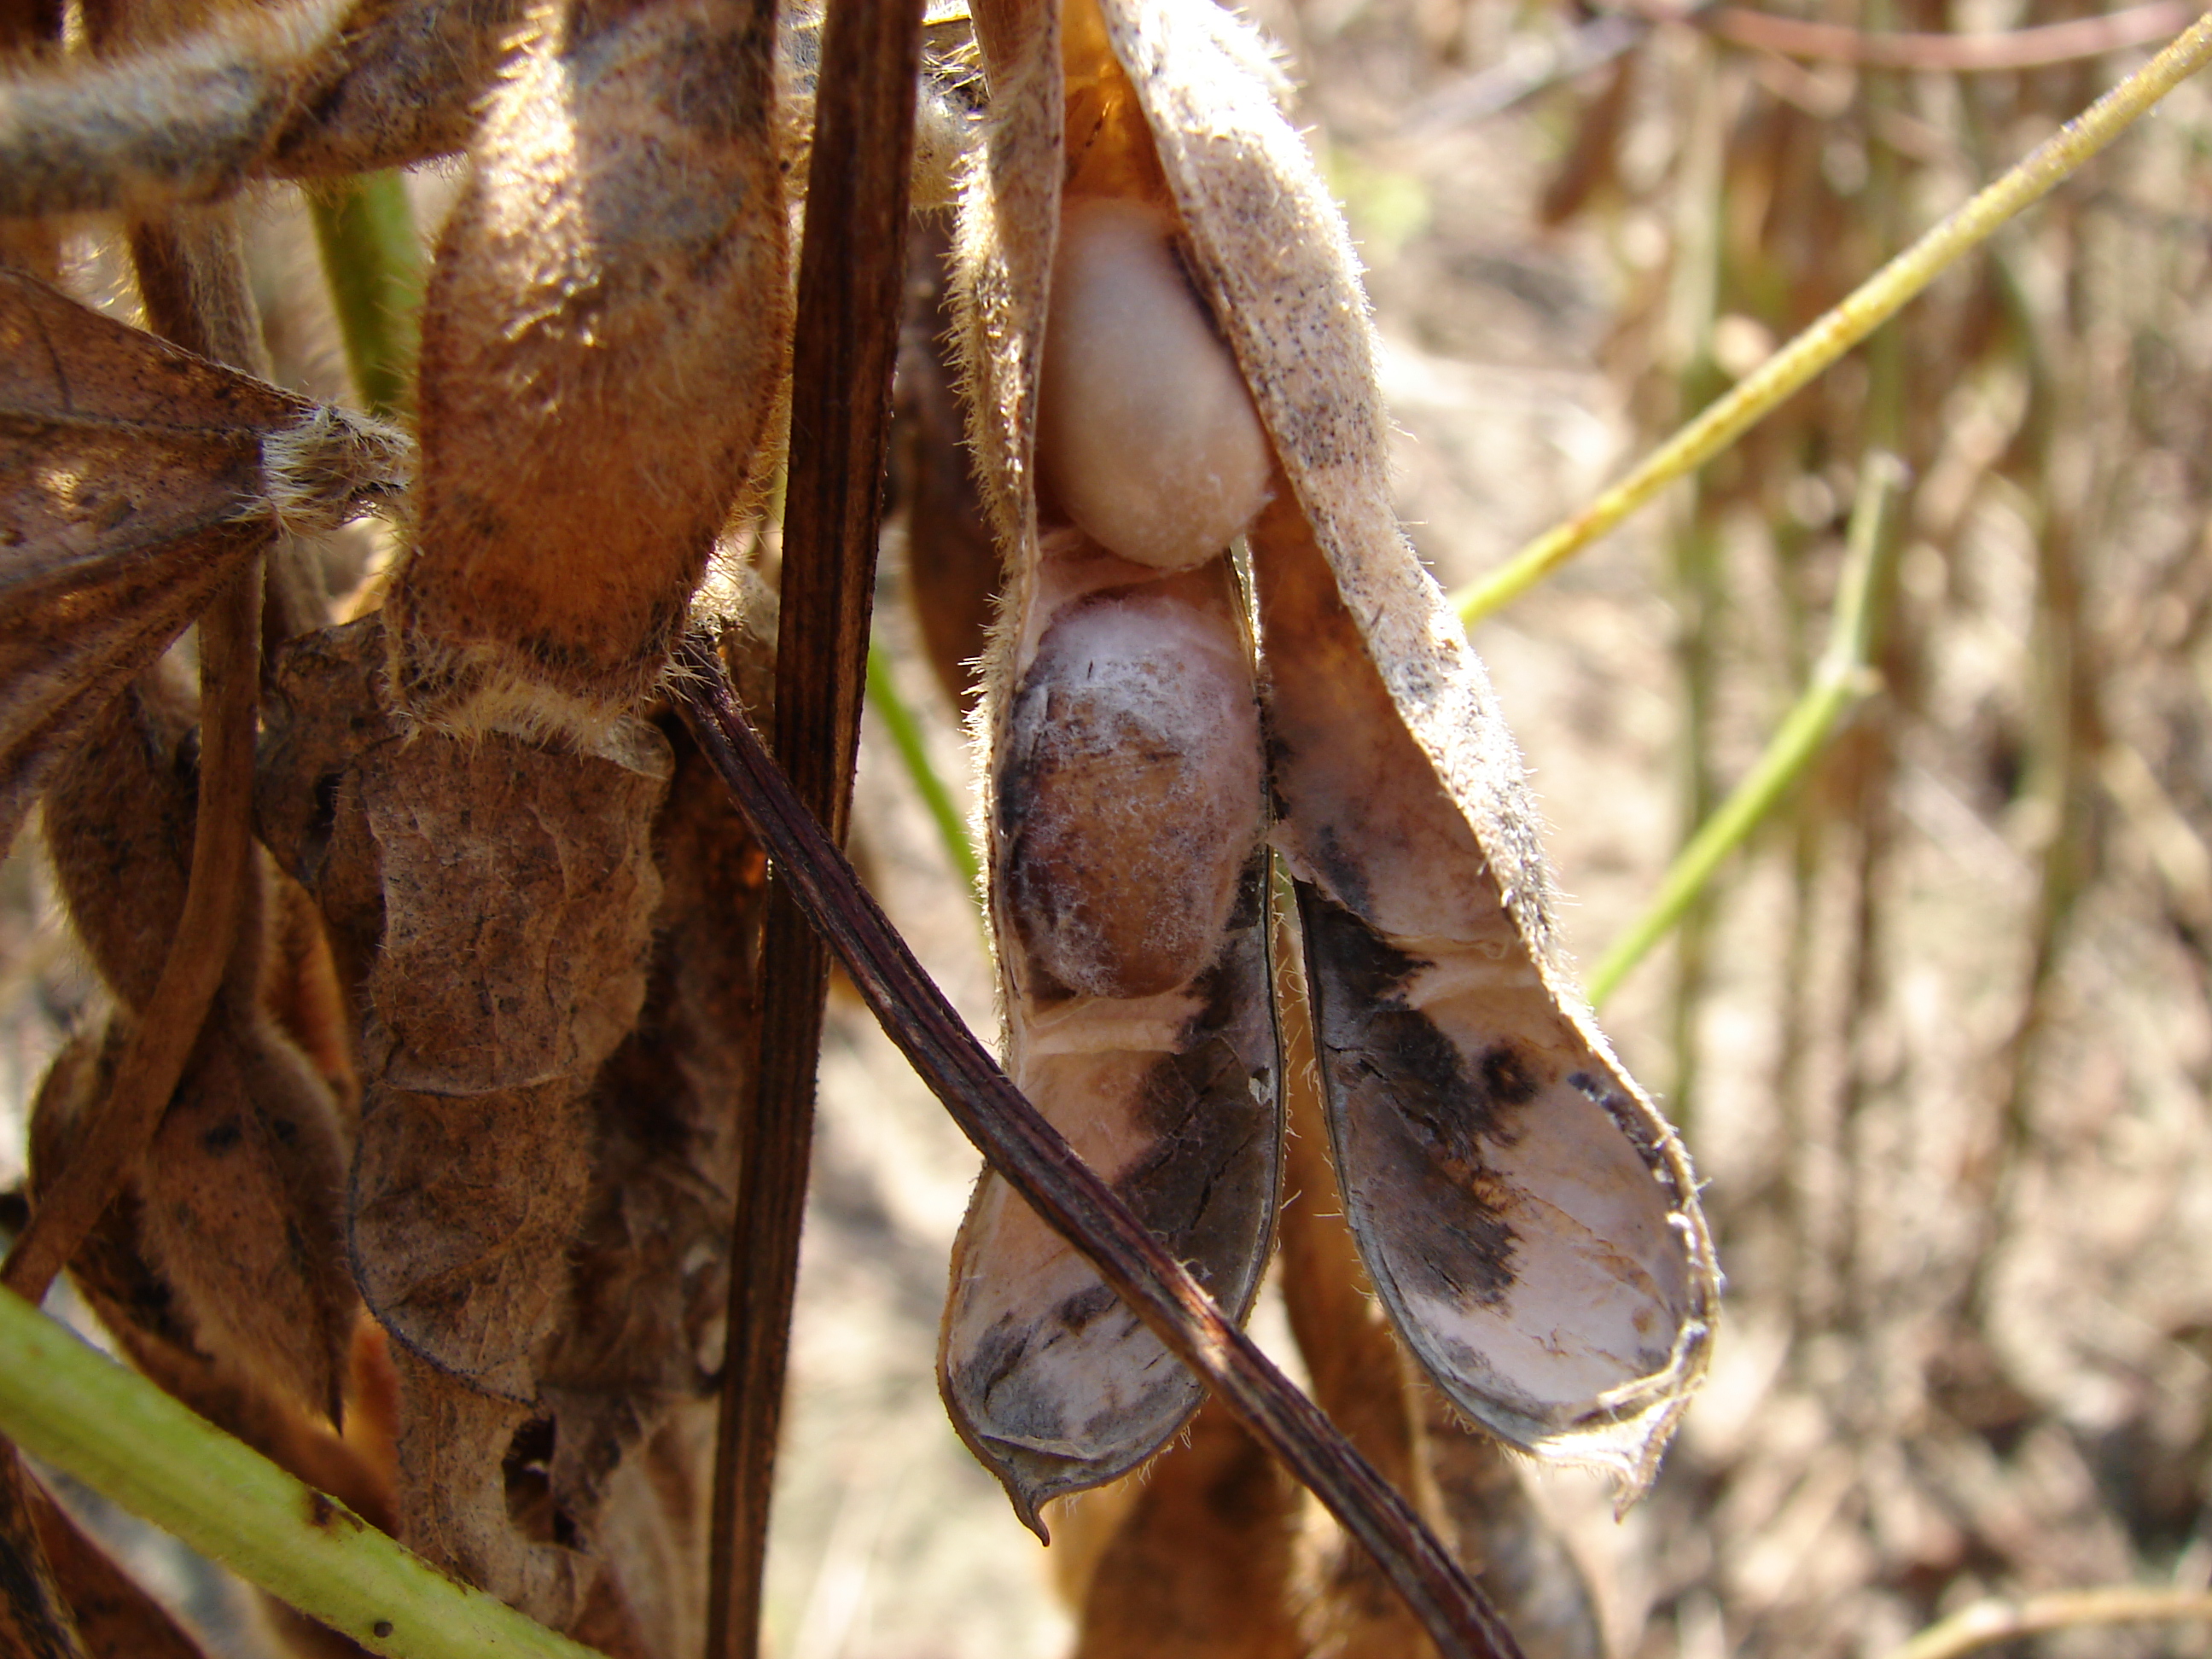 Phomopsis-infected seed are cracked and shriveled and often covered with chalky, white mold